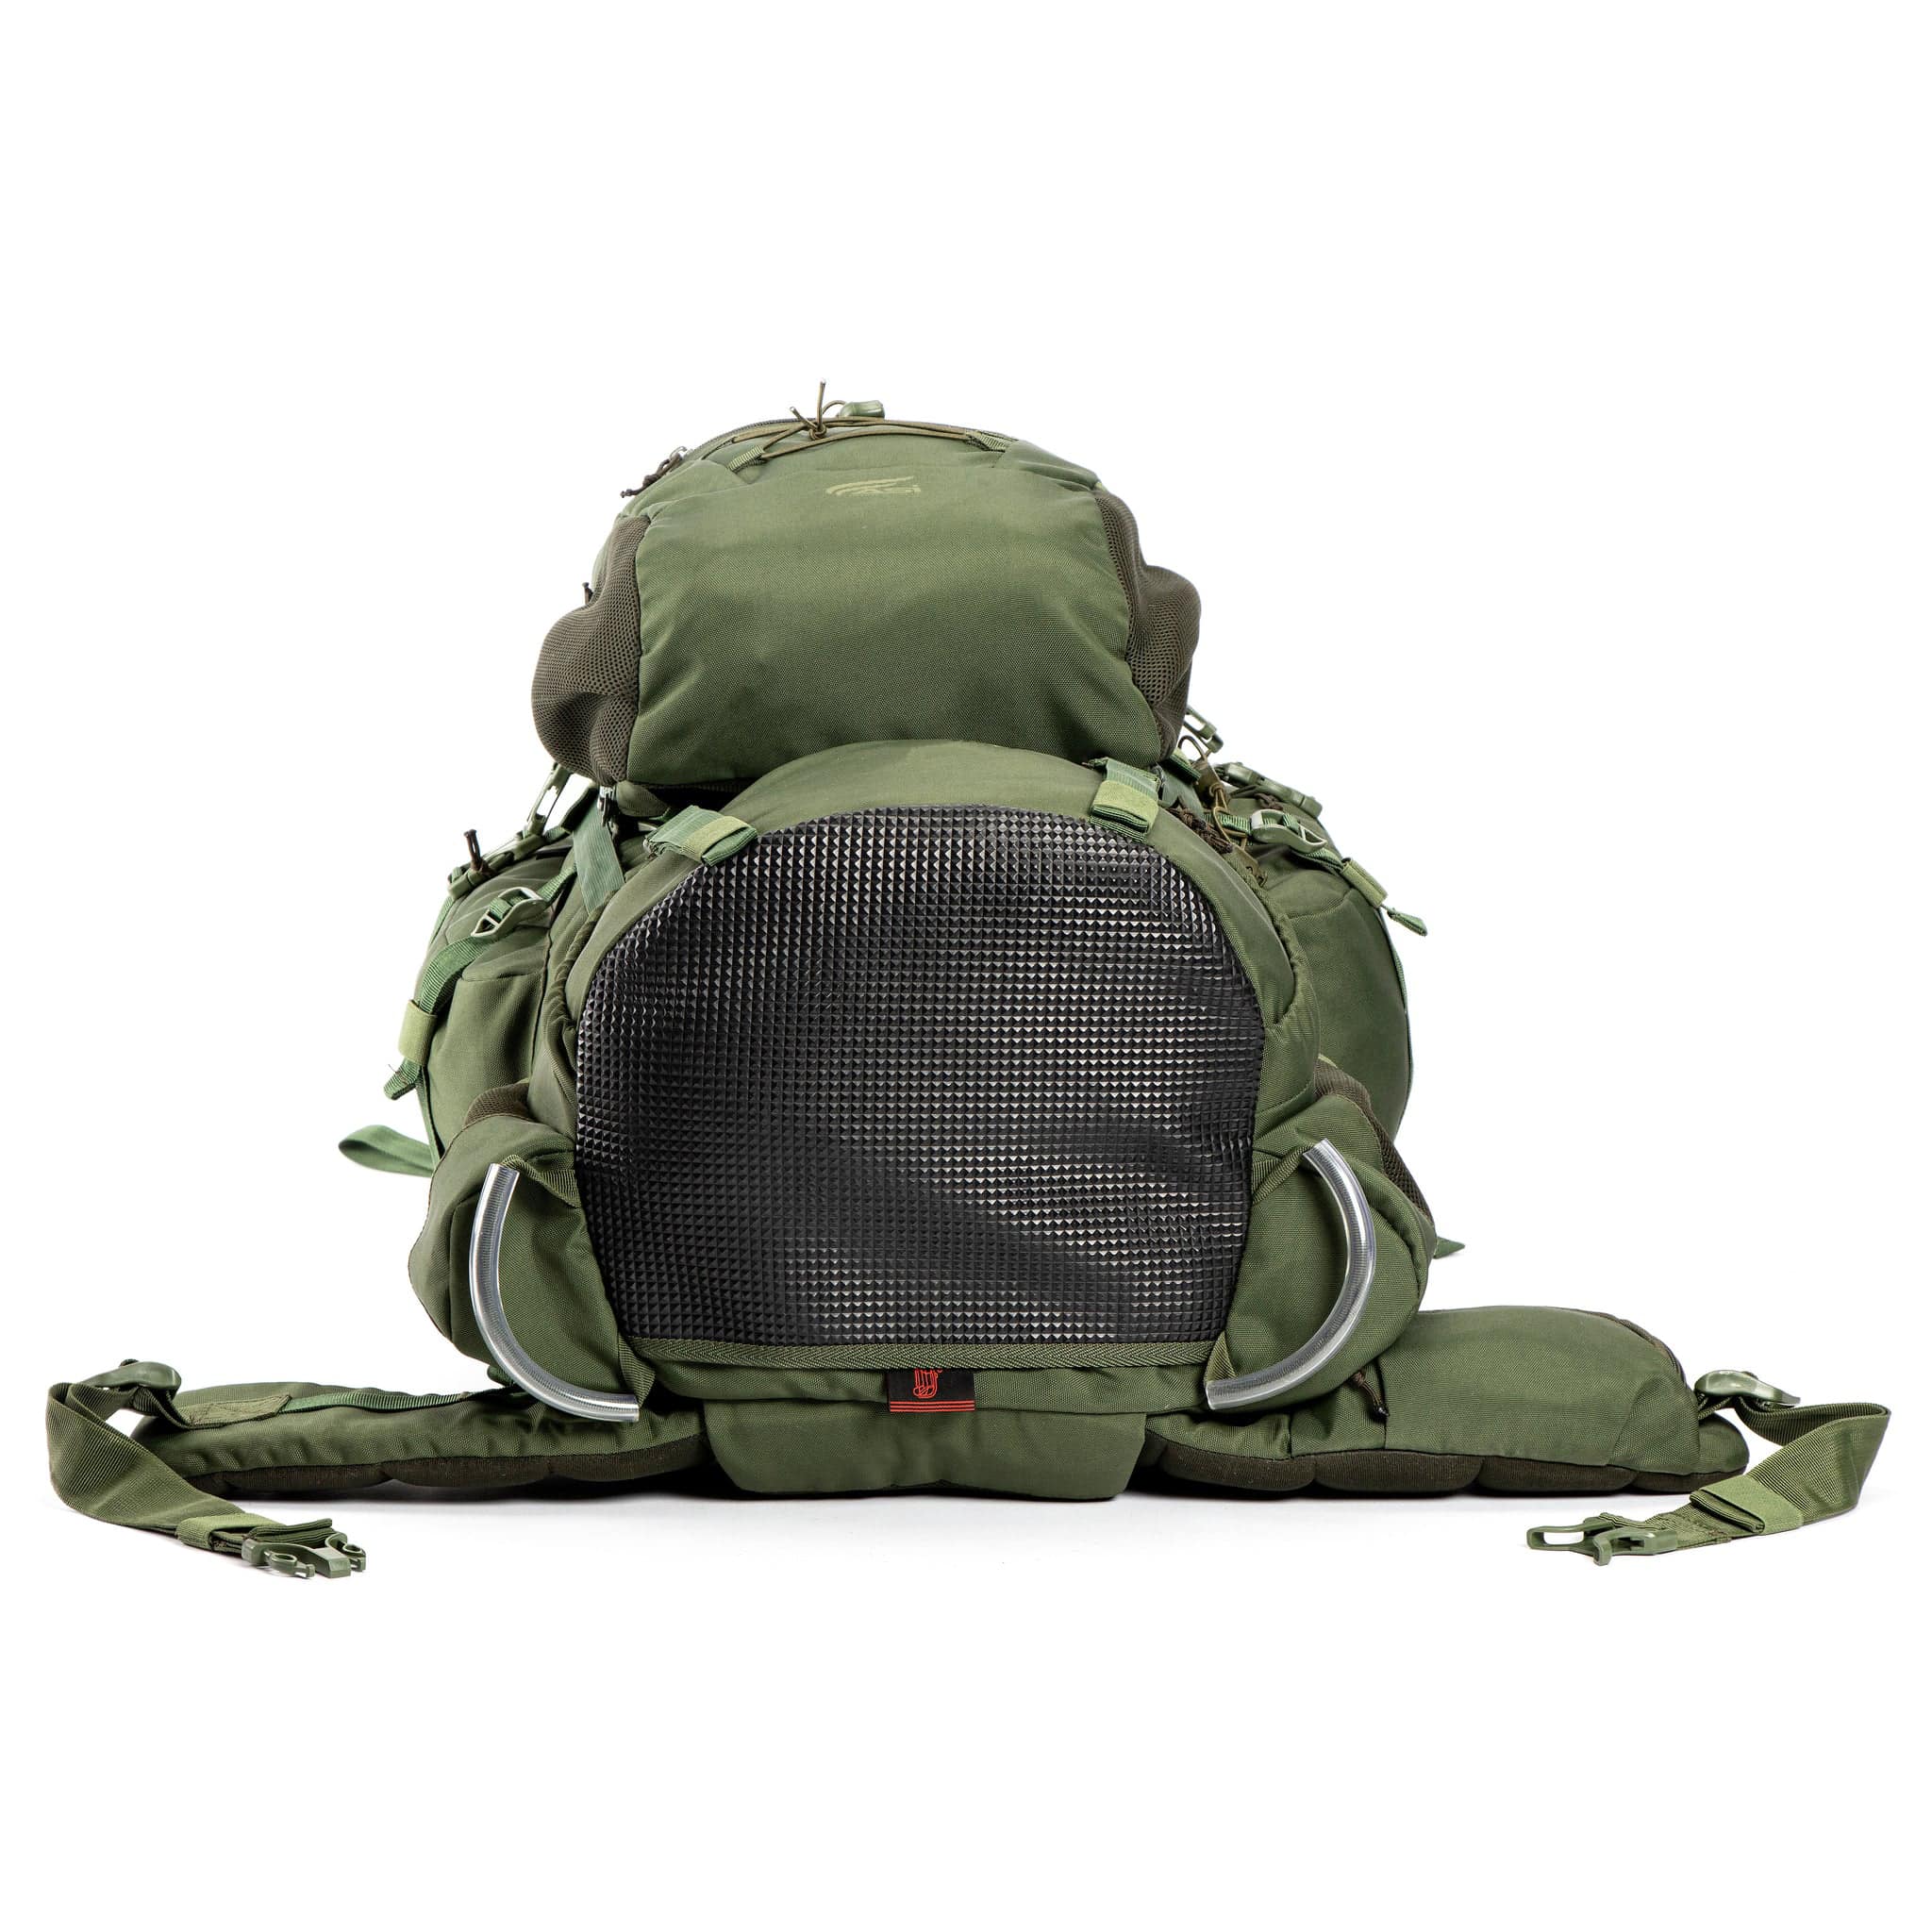 ASI Summit 90 Metal Frame Rucksack | Front Opening | Detachable Bag | Rain Cover | 90 Litres, Army Green